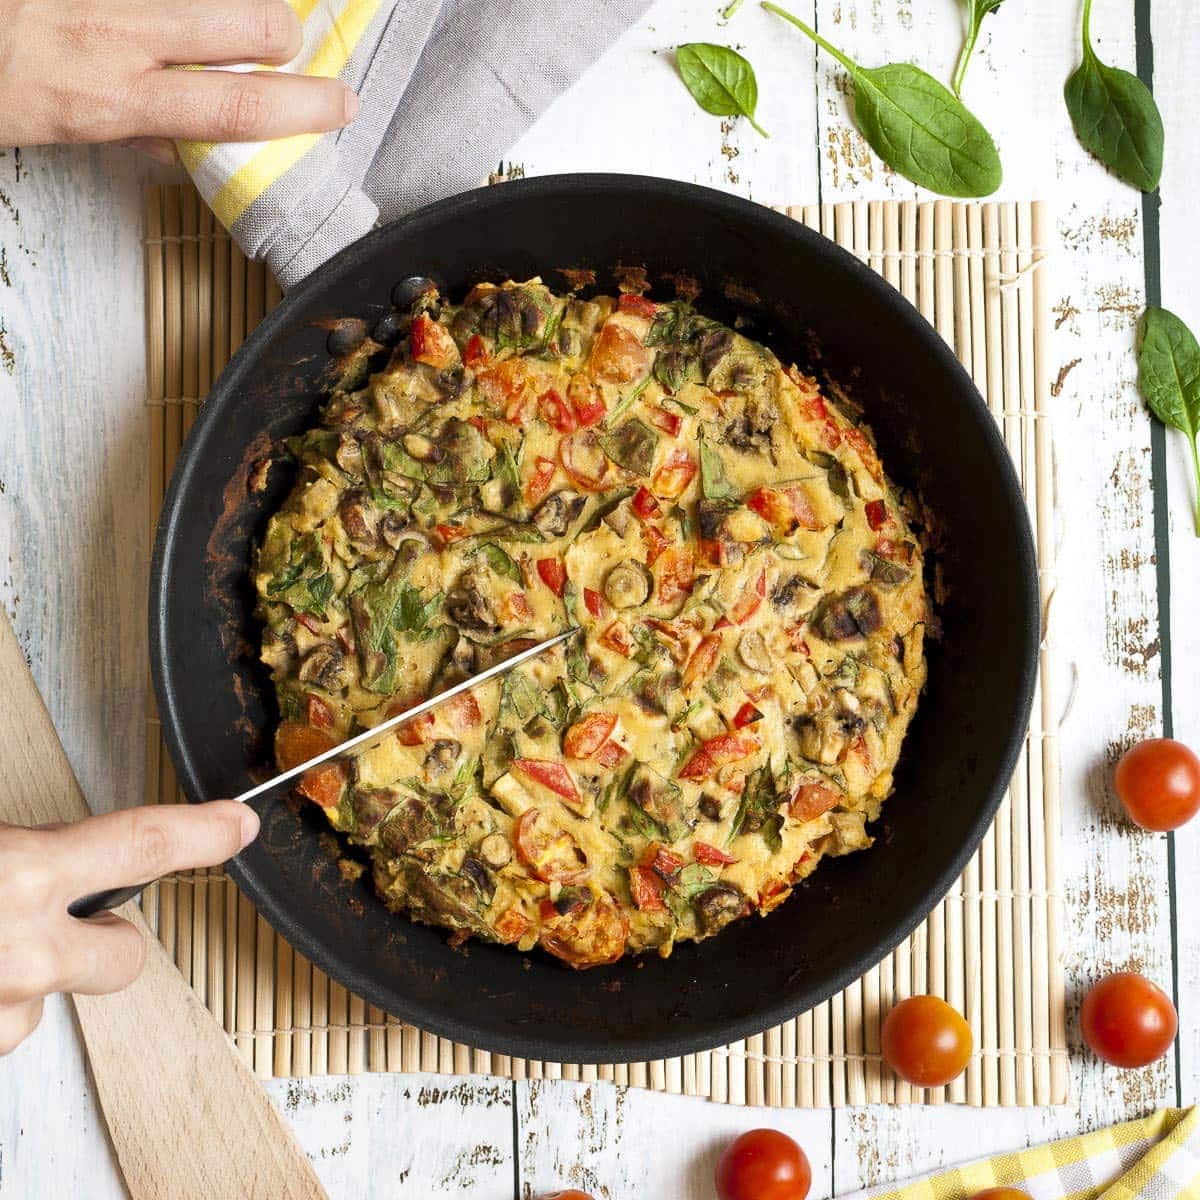 Frying pan from above with a yellow frittata full of veggies like chopped red bell pepper, green spinach leaves, brown mushroom, red tomatoes. A hand is holding a knife and about to slice in it. 